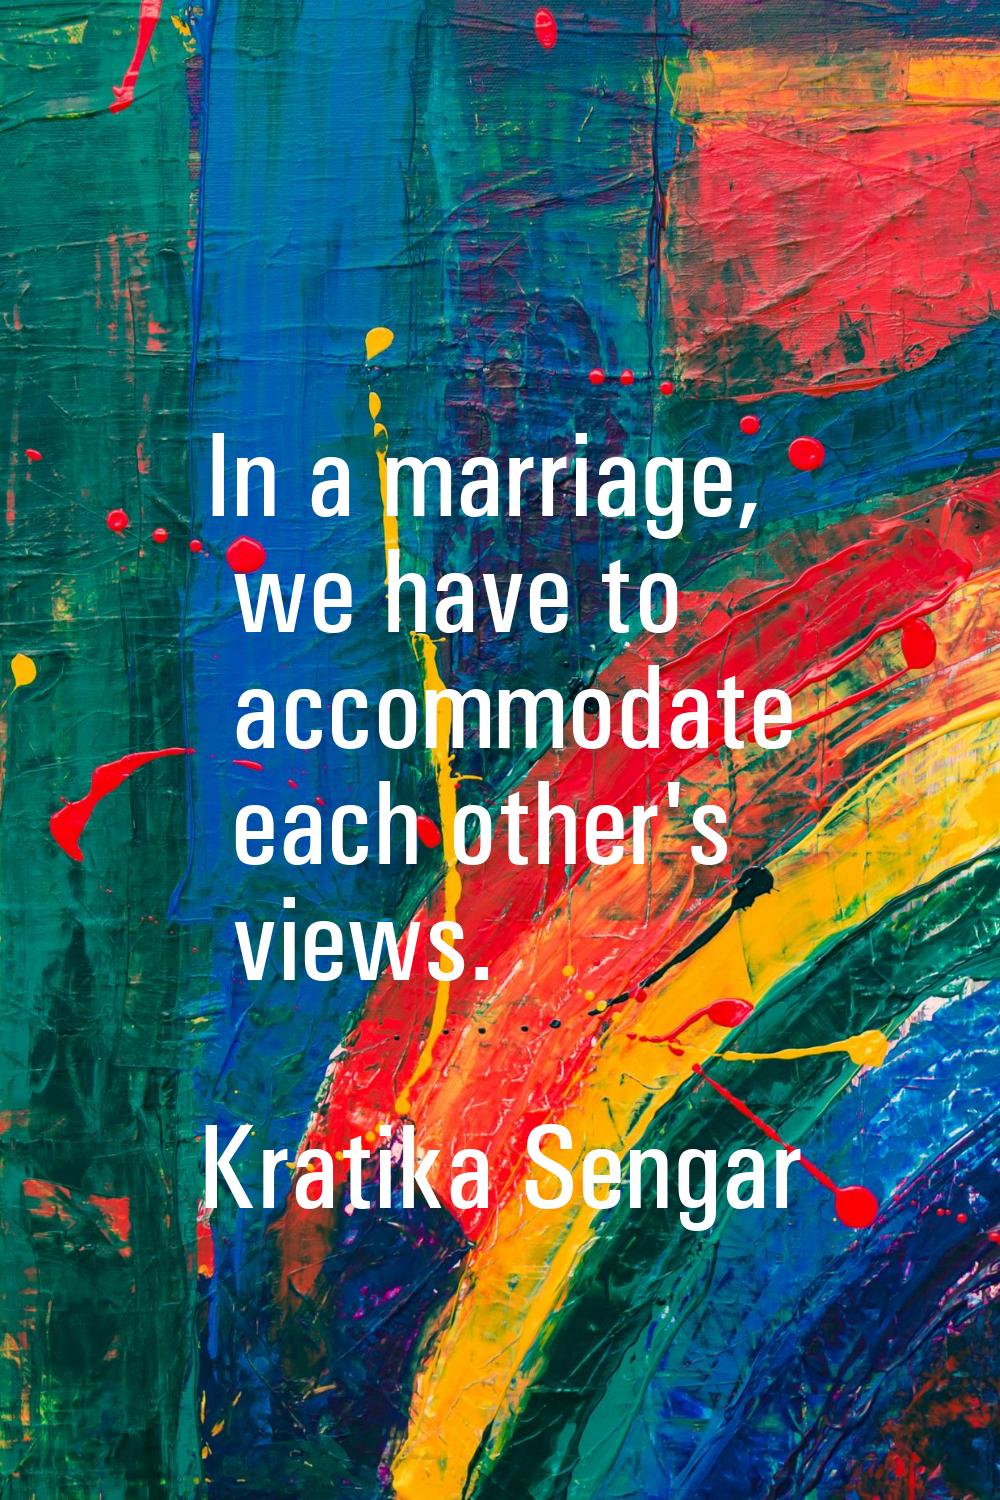 In a marriage, we have to accommodate each other's views.